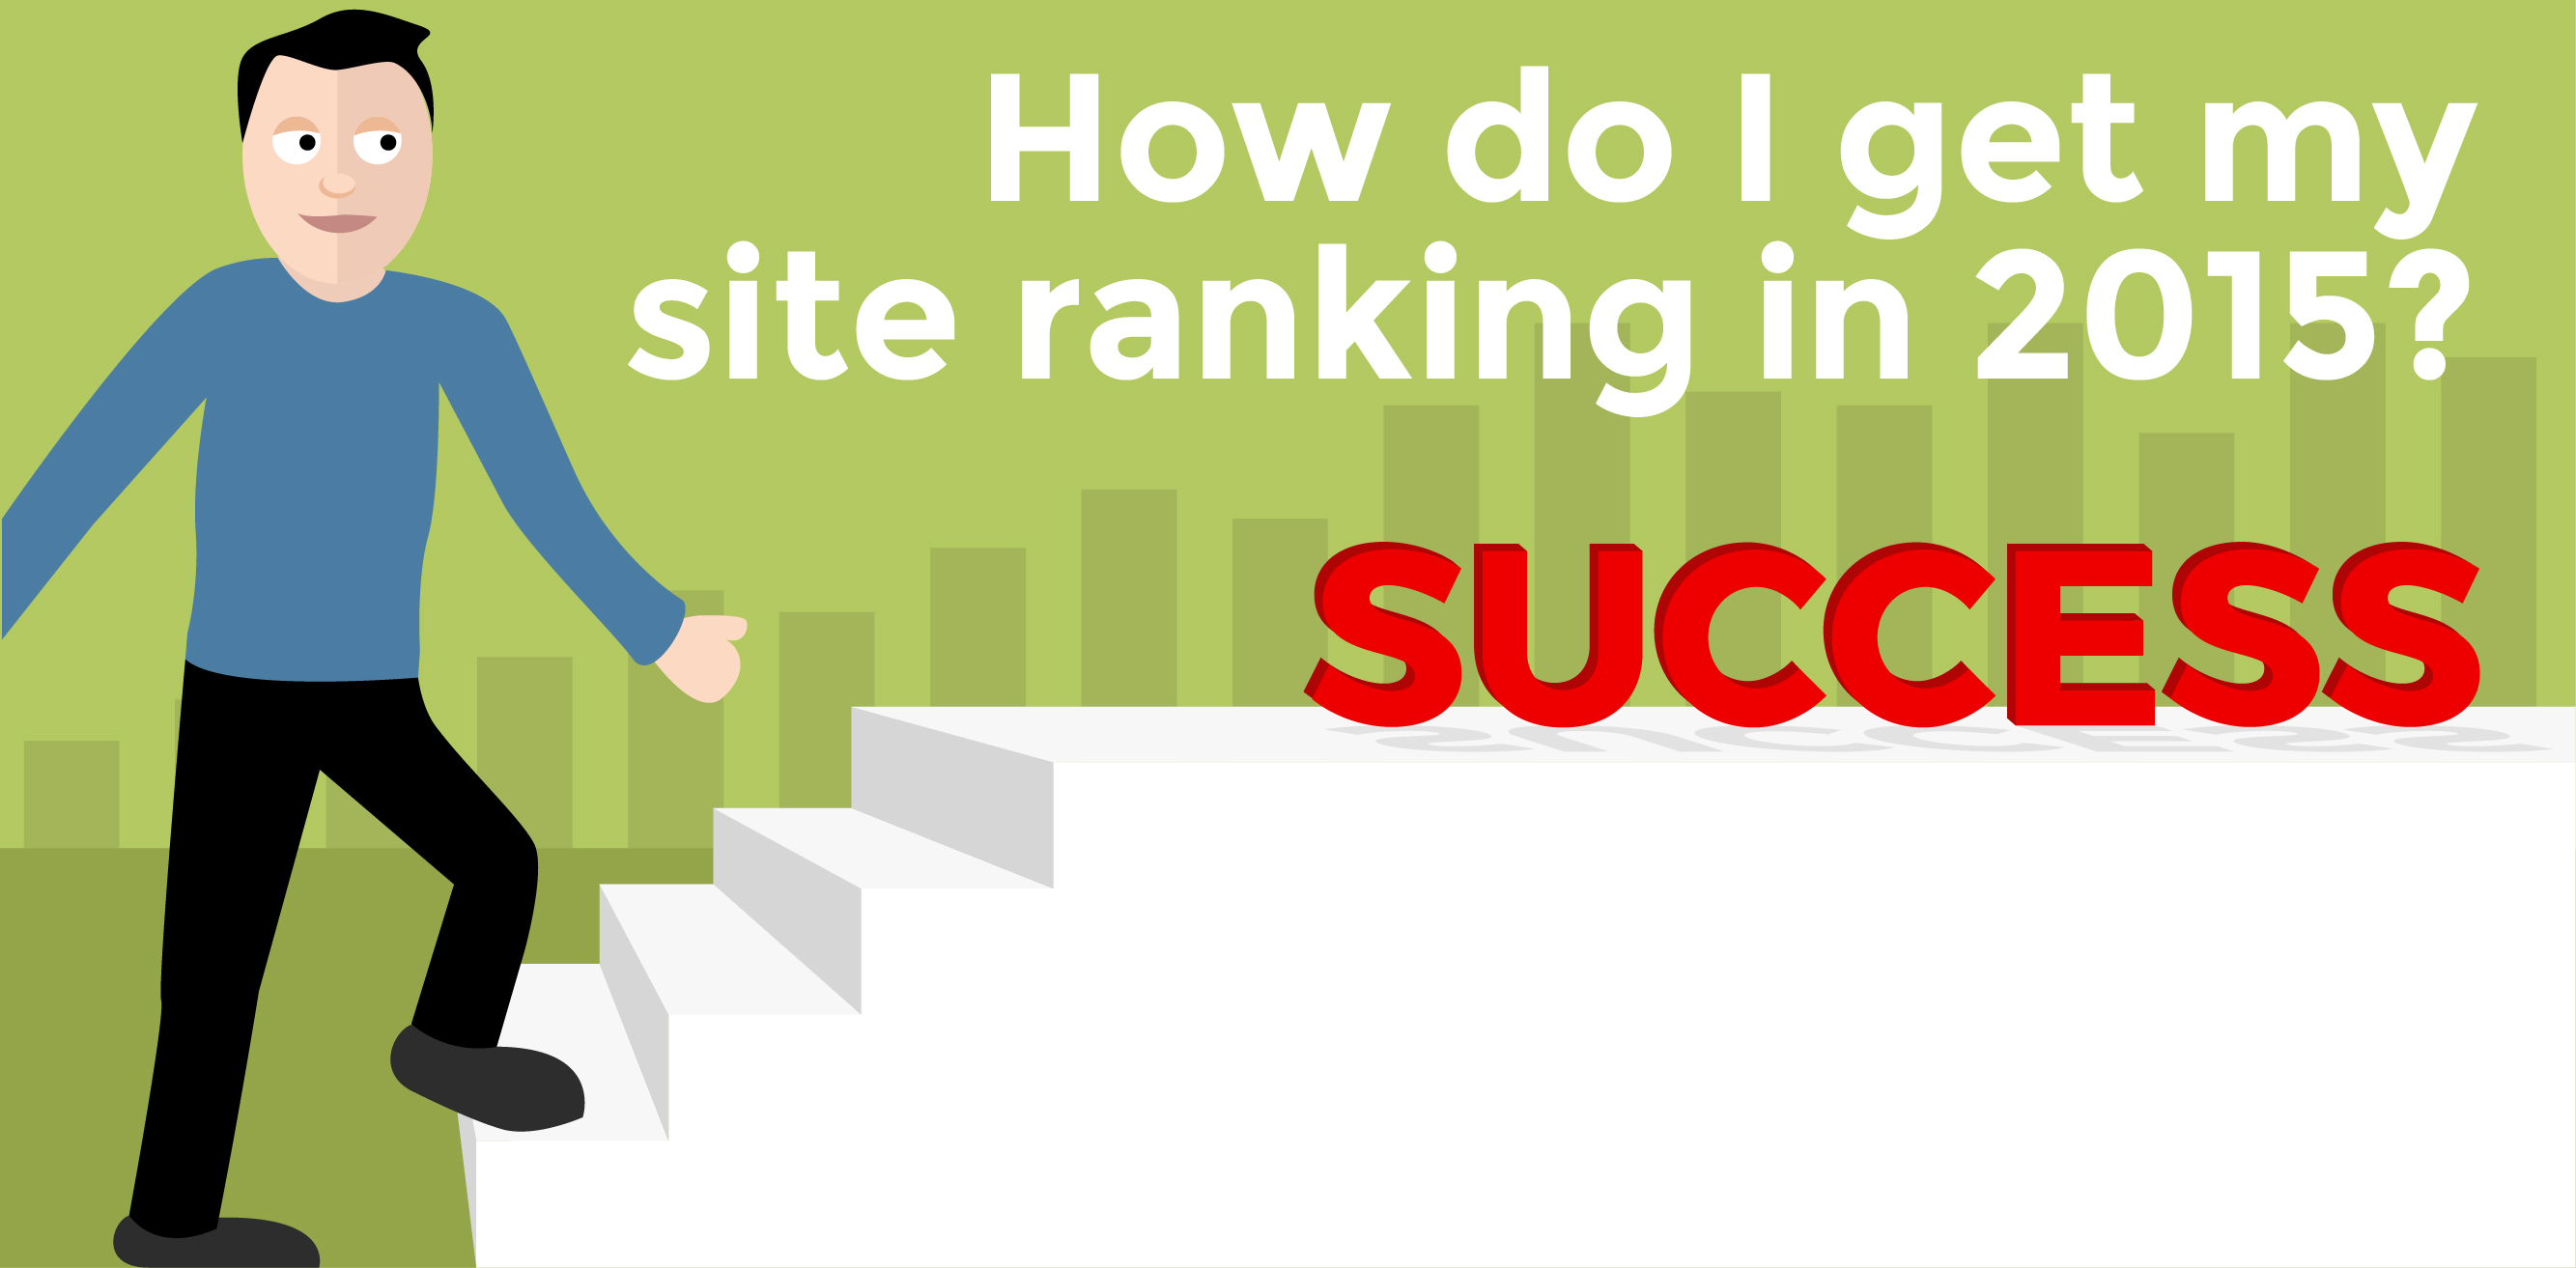 How to get your site ranking in 2015